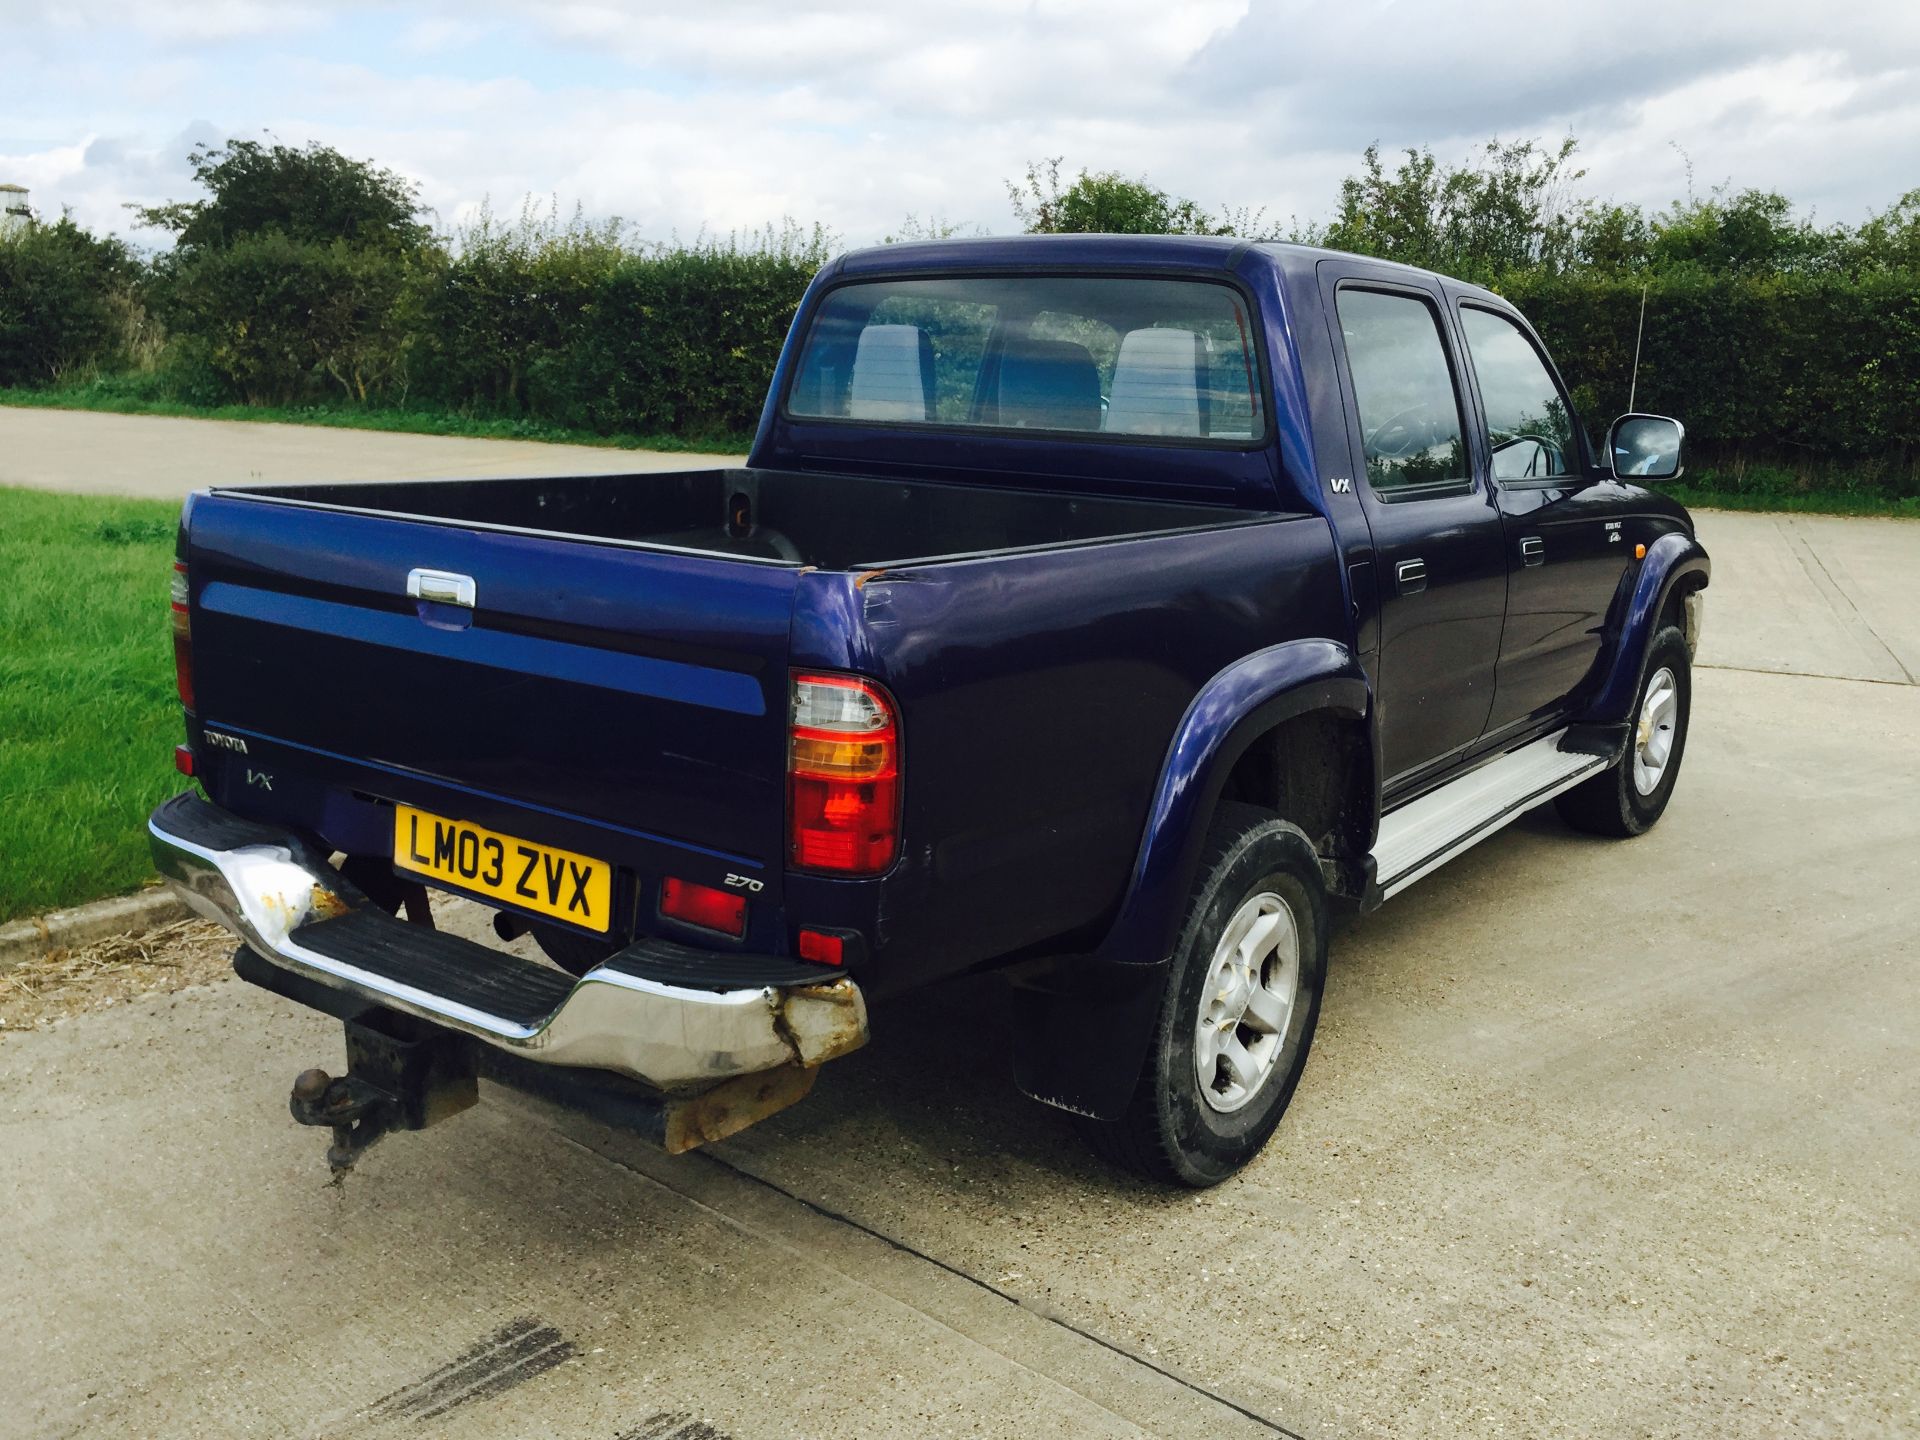 TOYOTA HILUX *VX MODEL* 2.5 2003(03) REG **AIR CON** COMPANY OWNED ONLY COVERED 85,099 MILES - Image 3 of 8